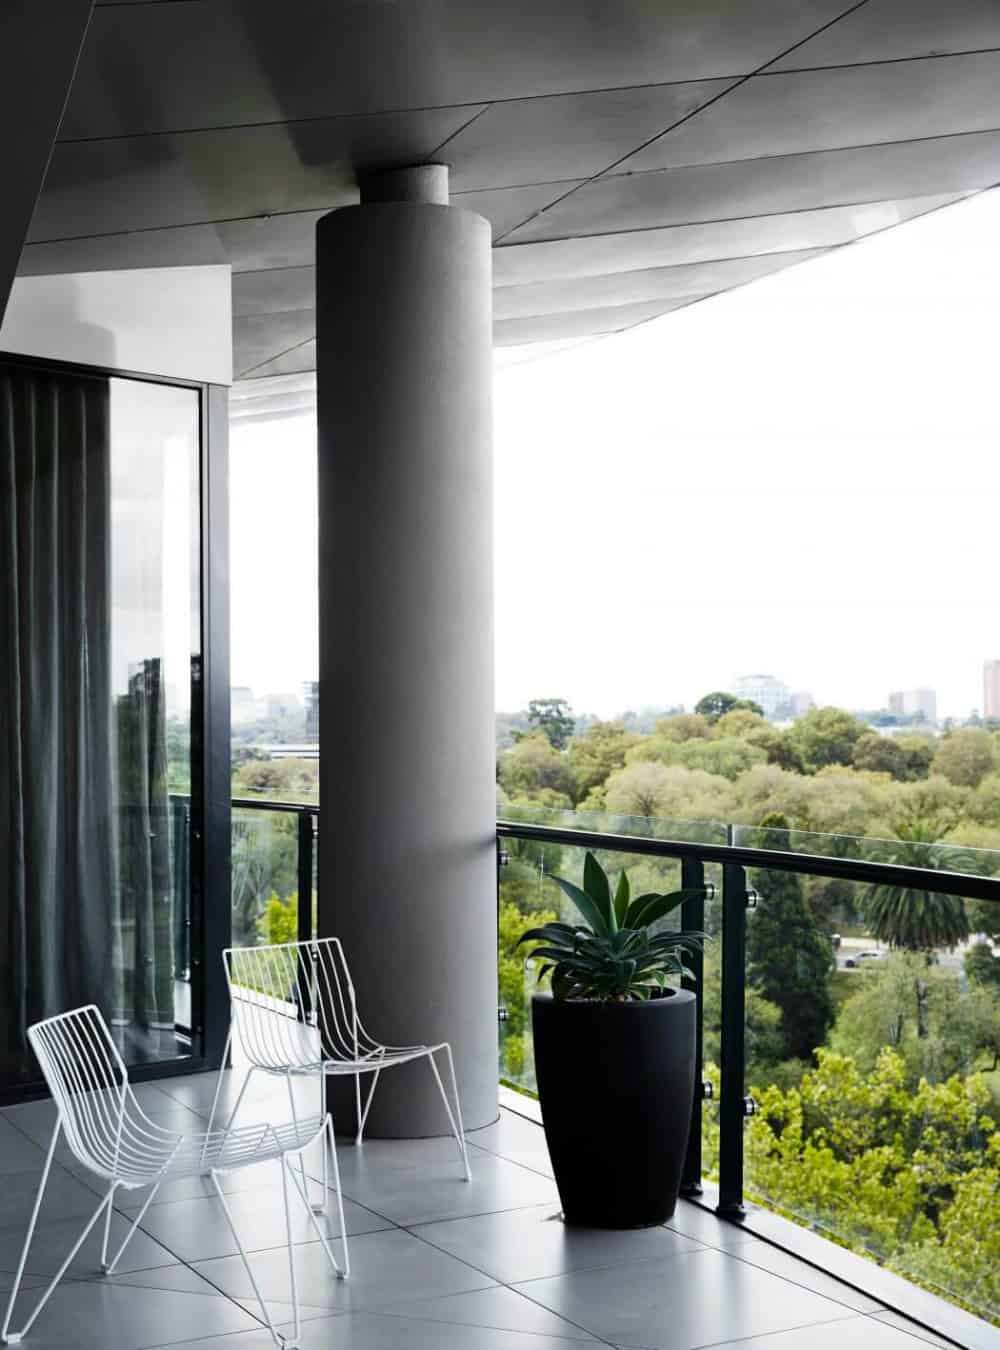 A balcony with a grand column opens up to great views